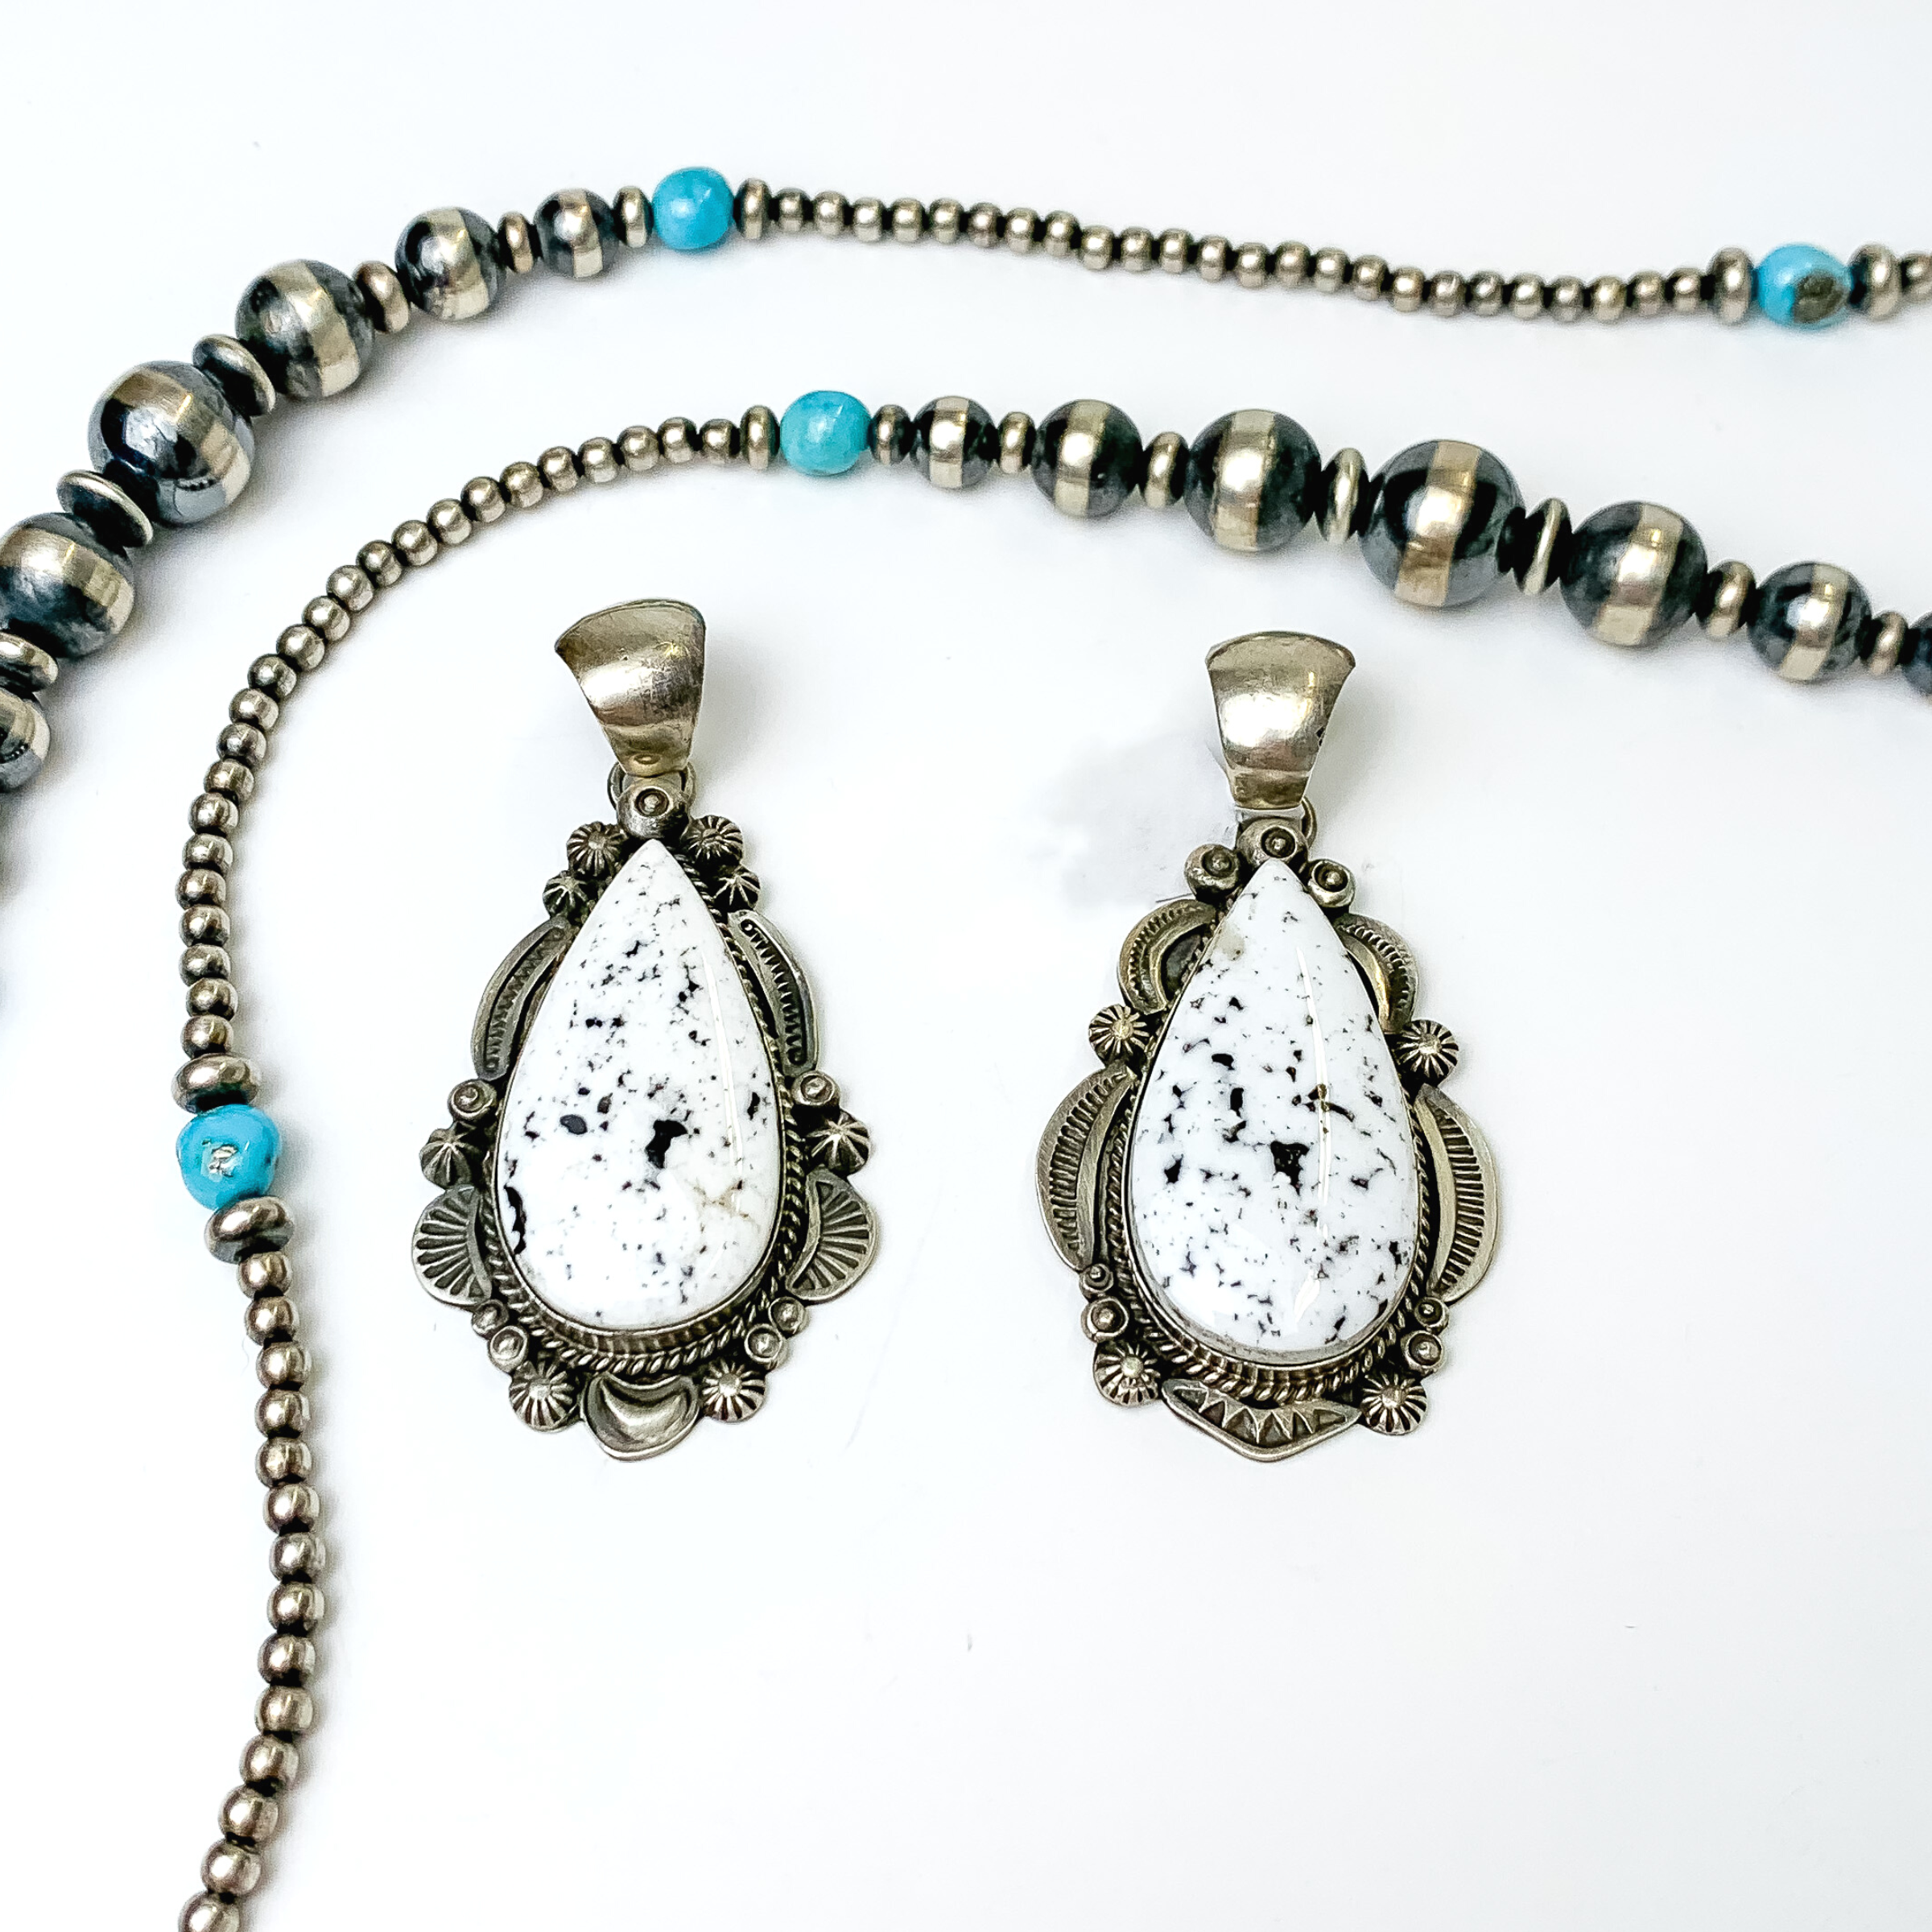 Two silver, teardrop pendants with white buffalo teardrop stone. These pendants are pictured on a white background with silver beads at the top of the picture.  